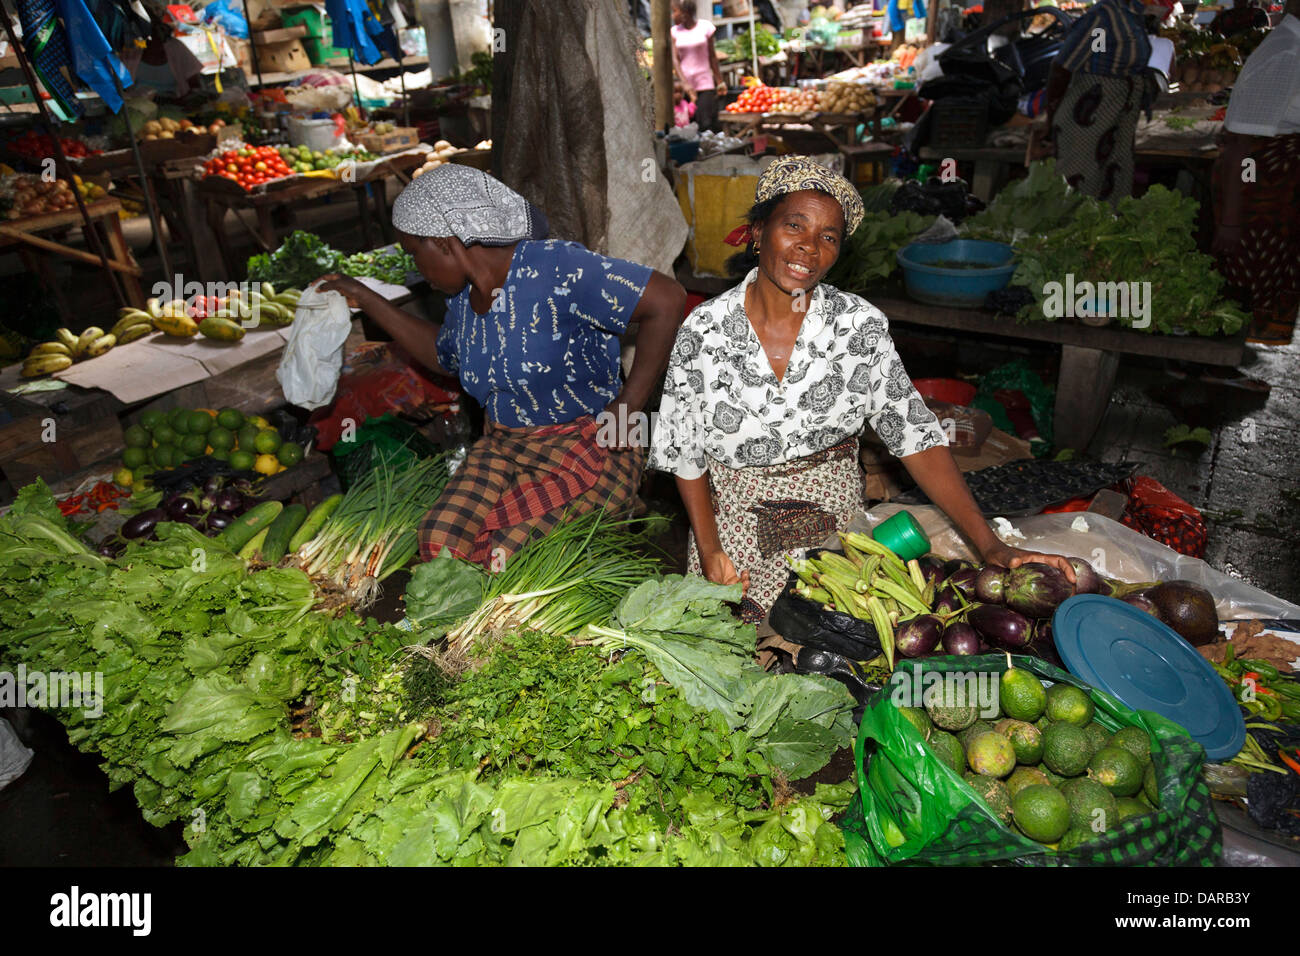 Africa, Mozambique, Inhambane. Women selling vegetables in Central Market. Stock Photo